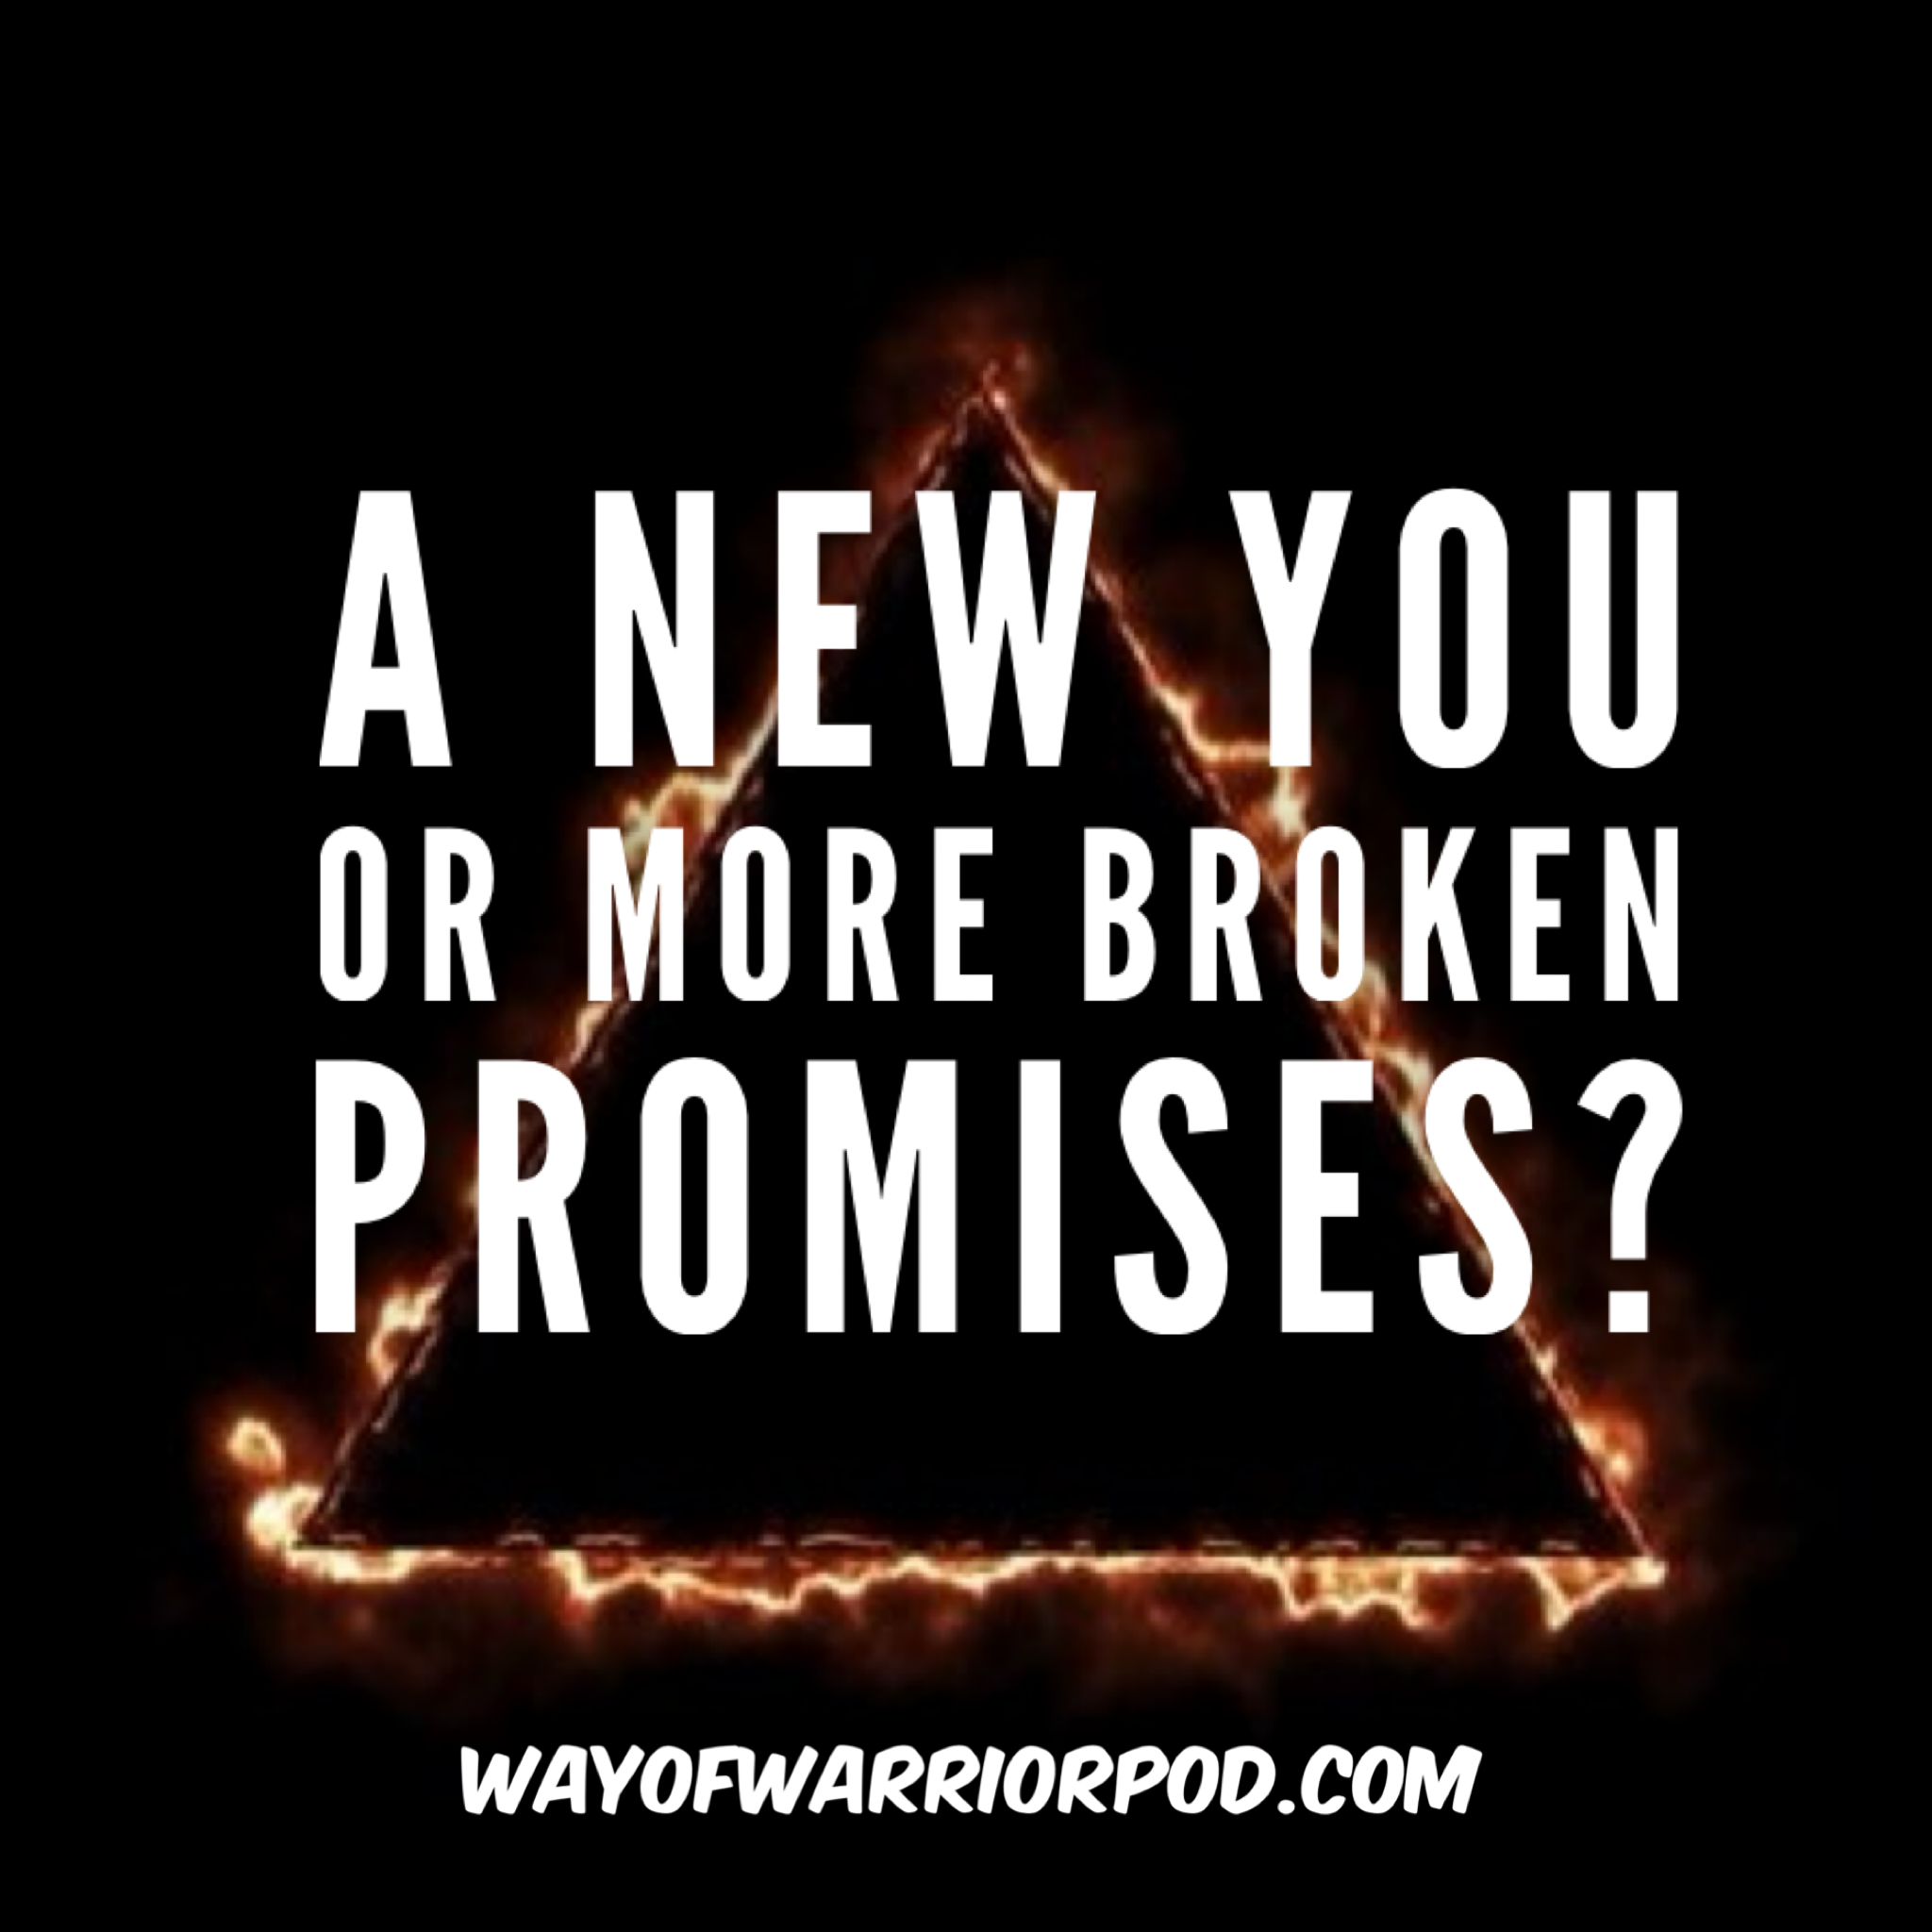 A New You or More Broken Promises?